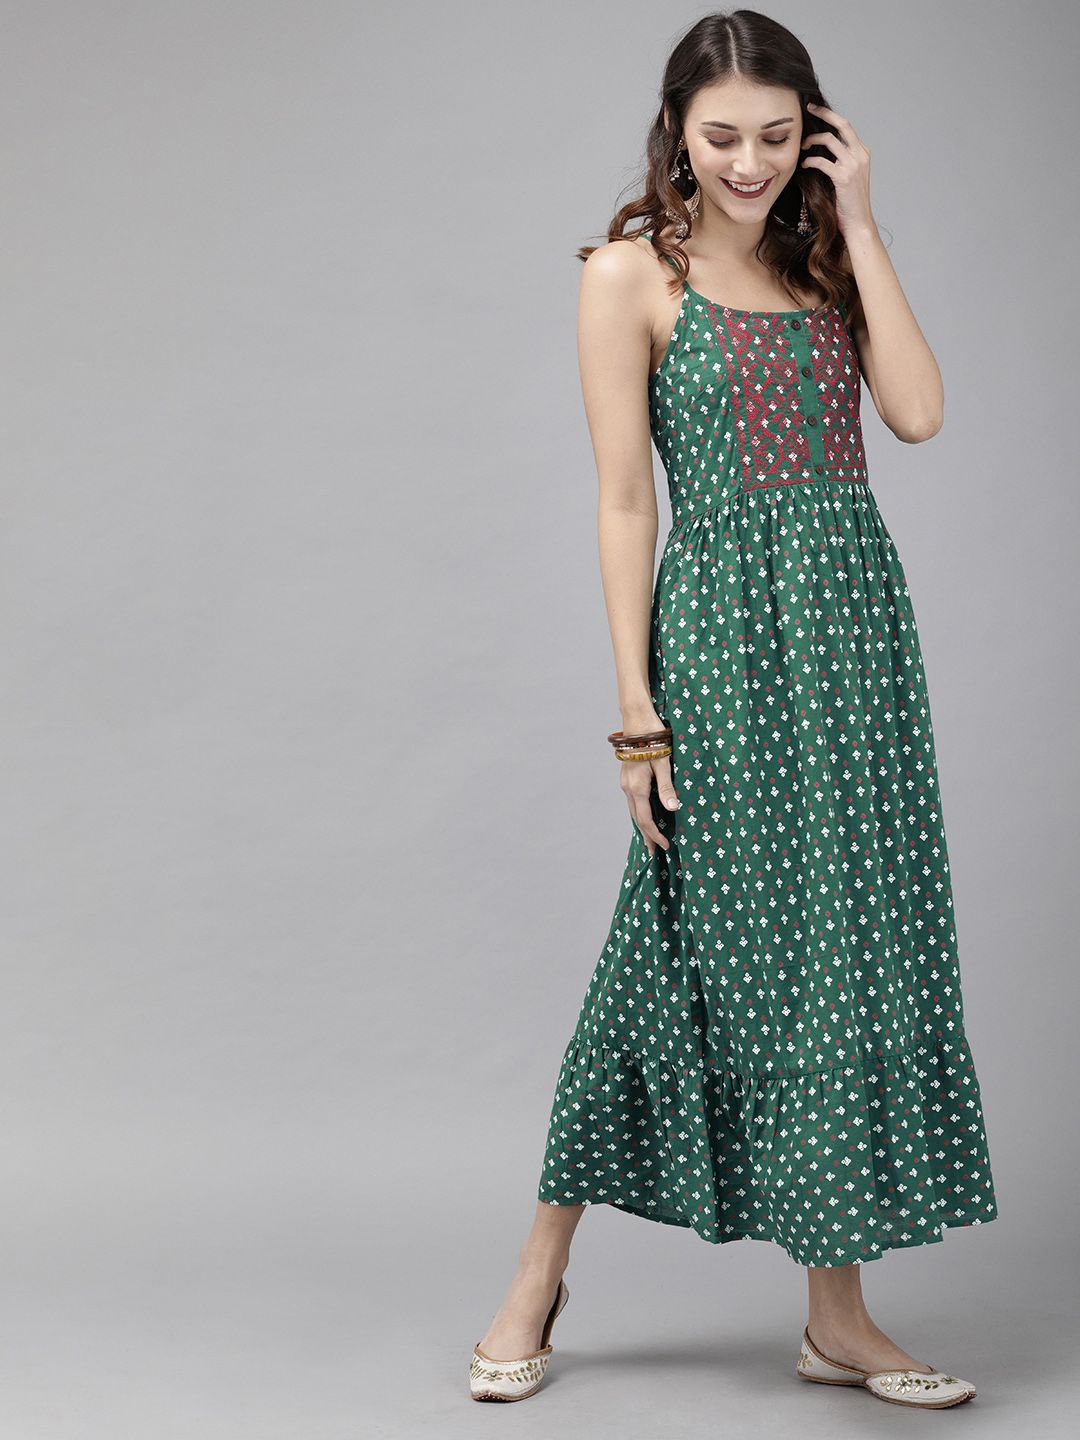 Anouk Green Ethnic Motifs Pure Cotton Printed Fit and Flare Dress Price in India